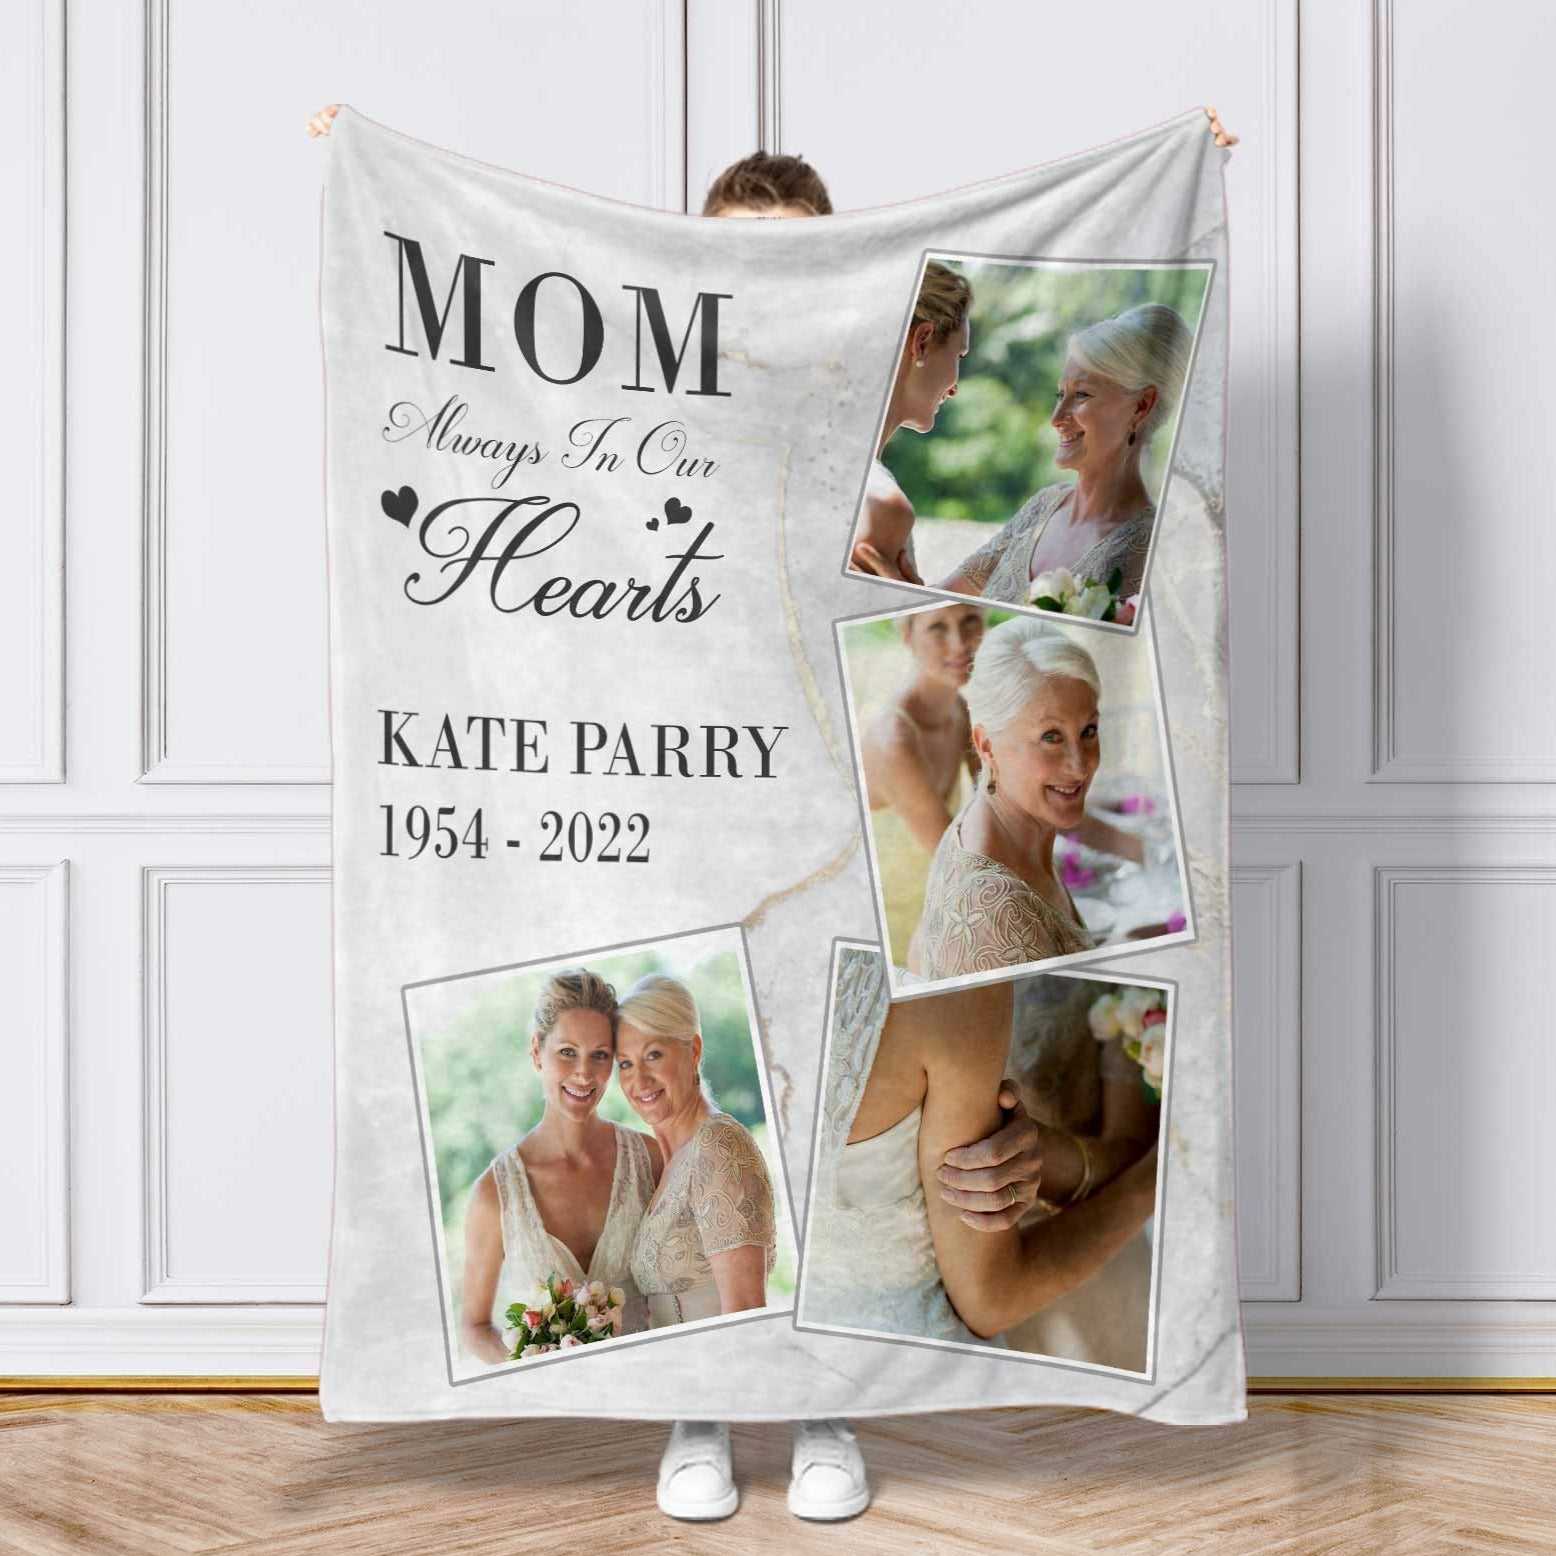 Personalized Memory Blankets For Loss Of Mother, Sympathy Blankets For Mothers Day Gift, Grieving Blanket